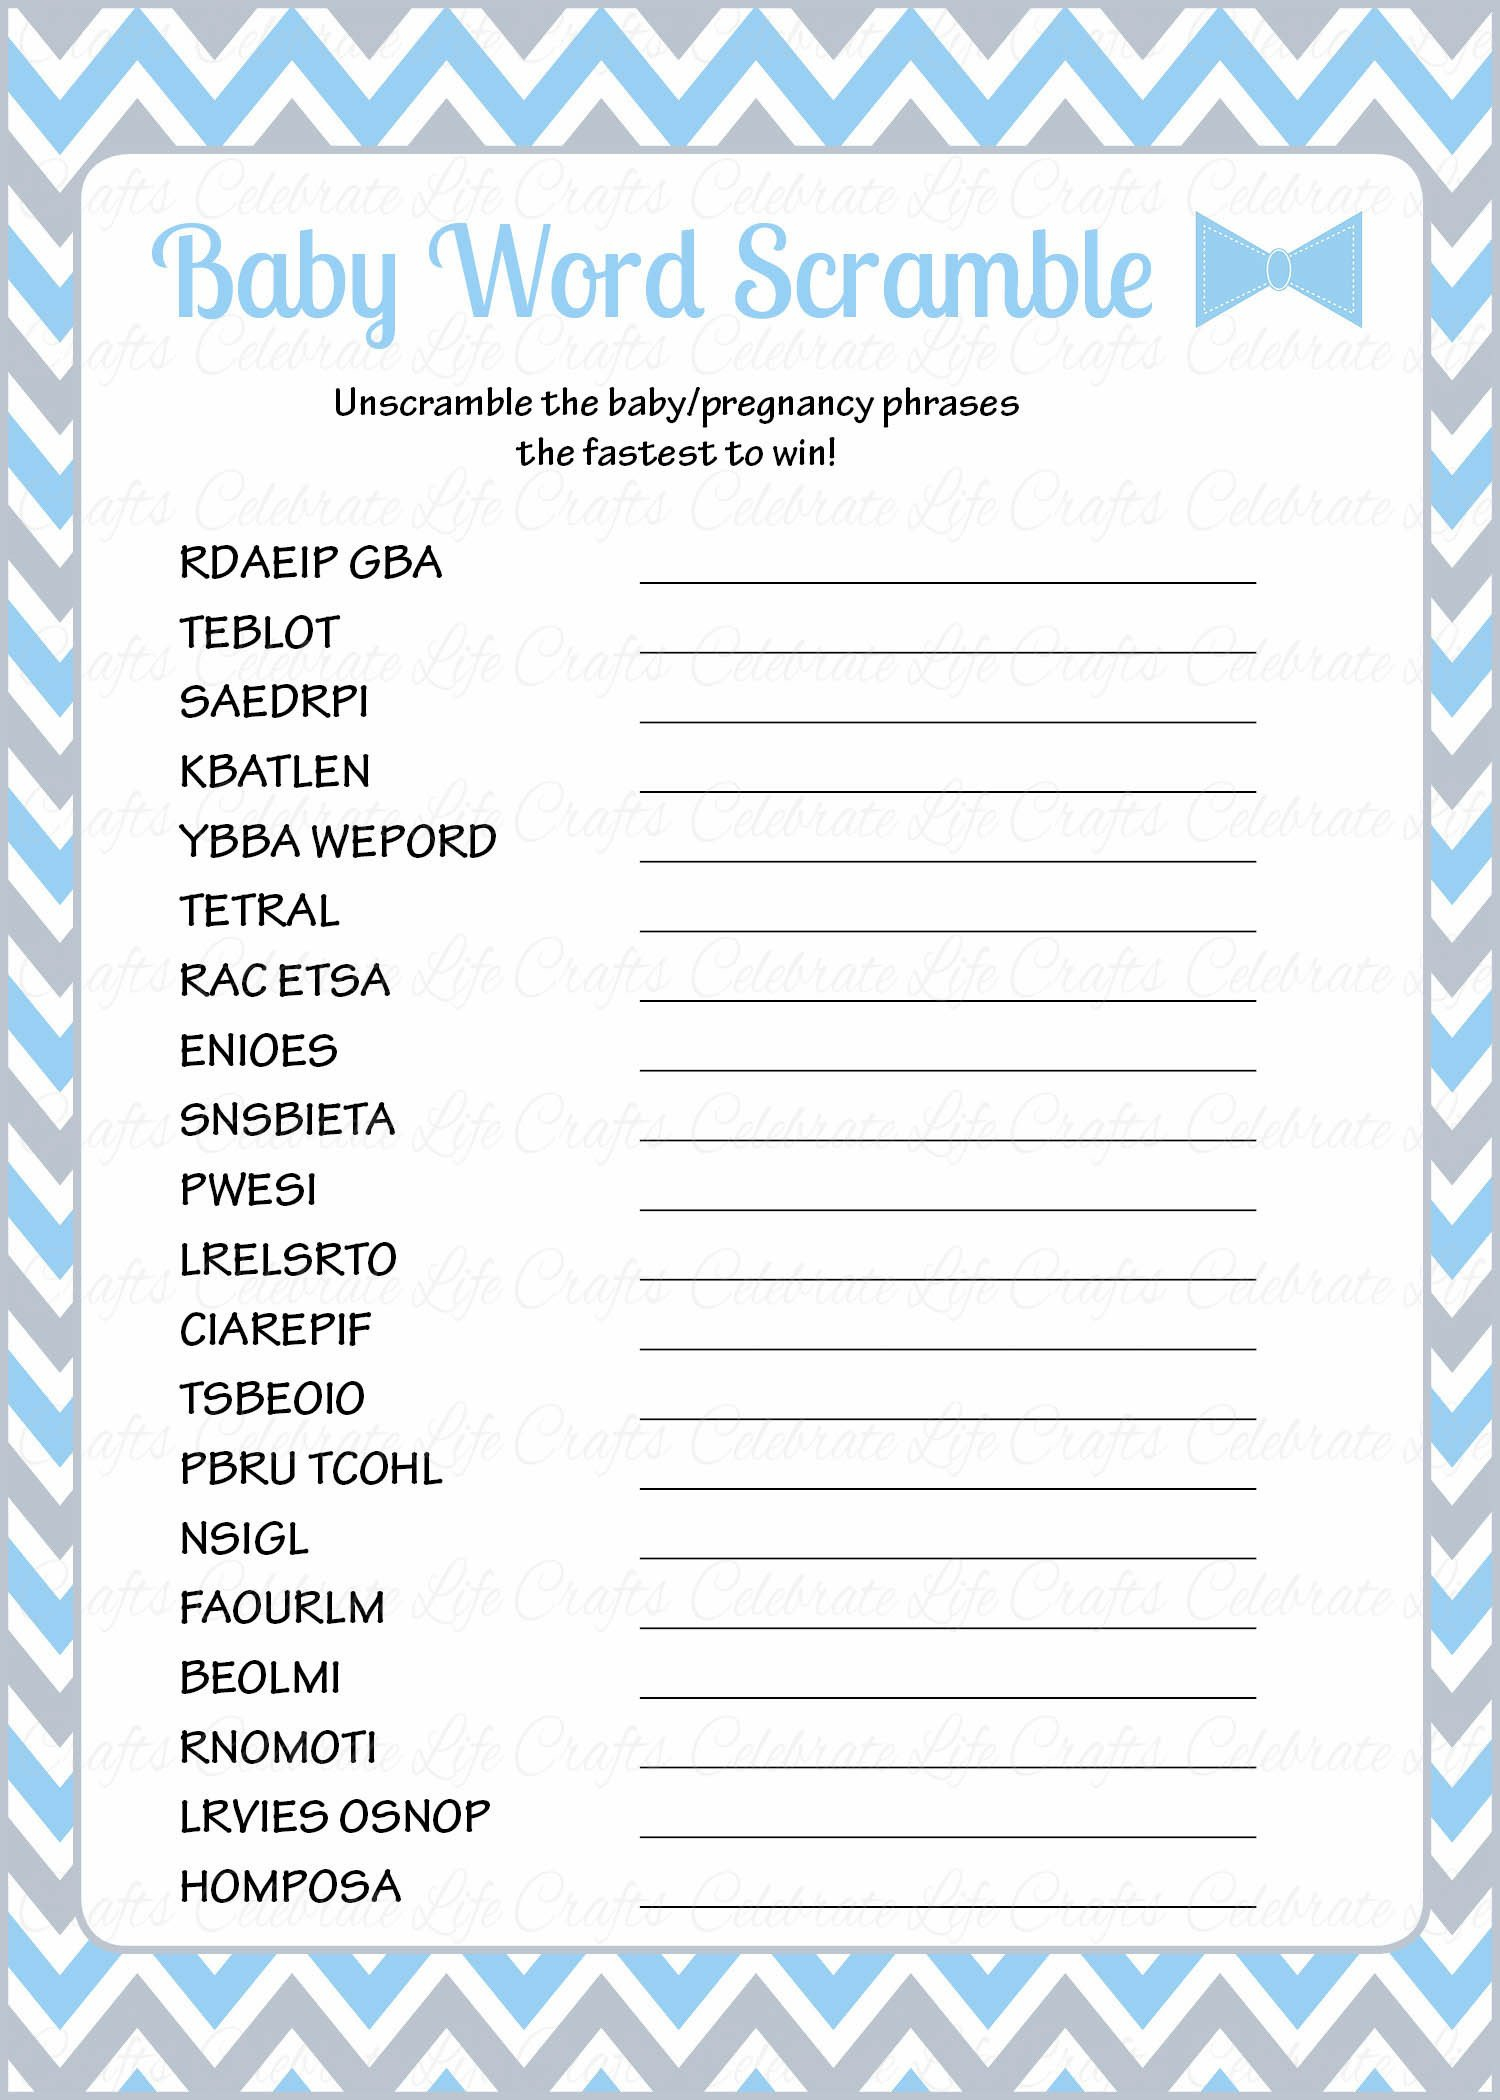 36 Adorable Baby Shower Word Scrambles KittyBabyLove